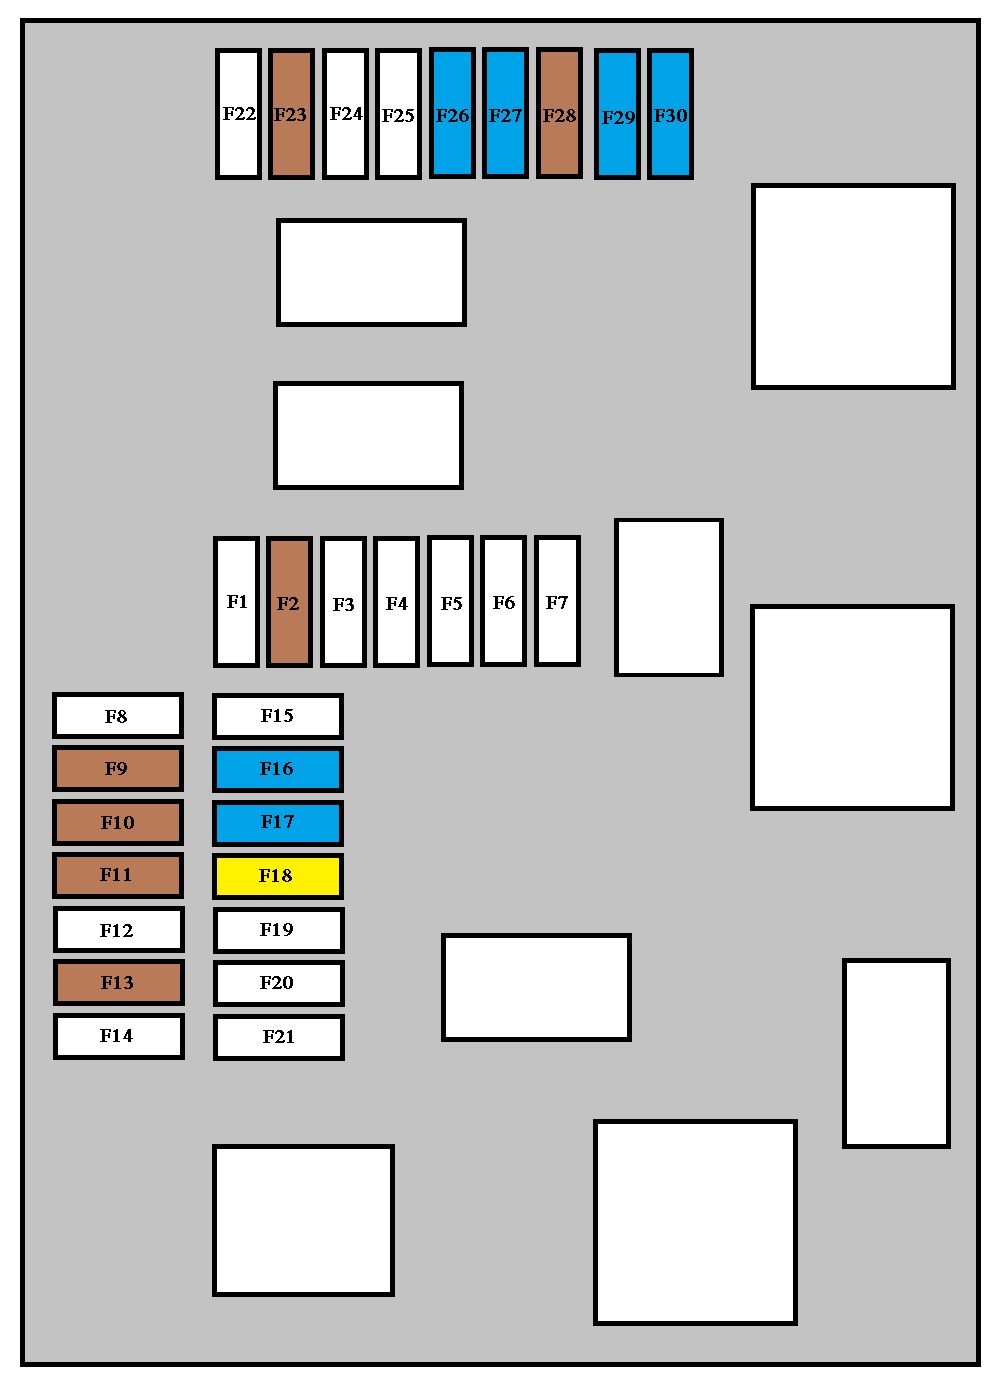 Peugeot 208 (from 2012) - fuse box diagram - Auto Genius peugeot 307 fuse box lay out 